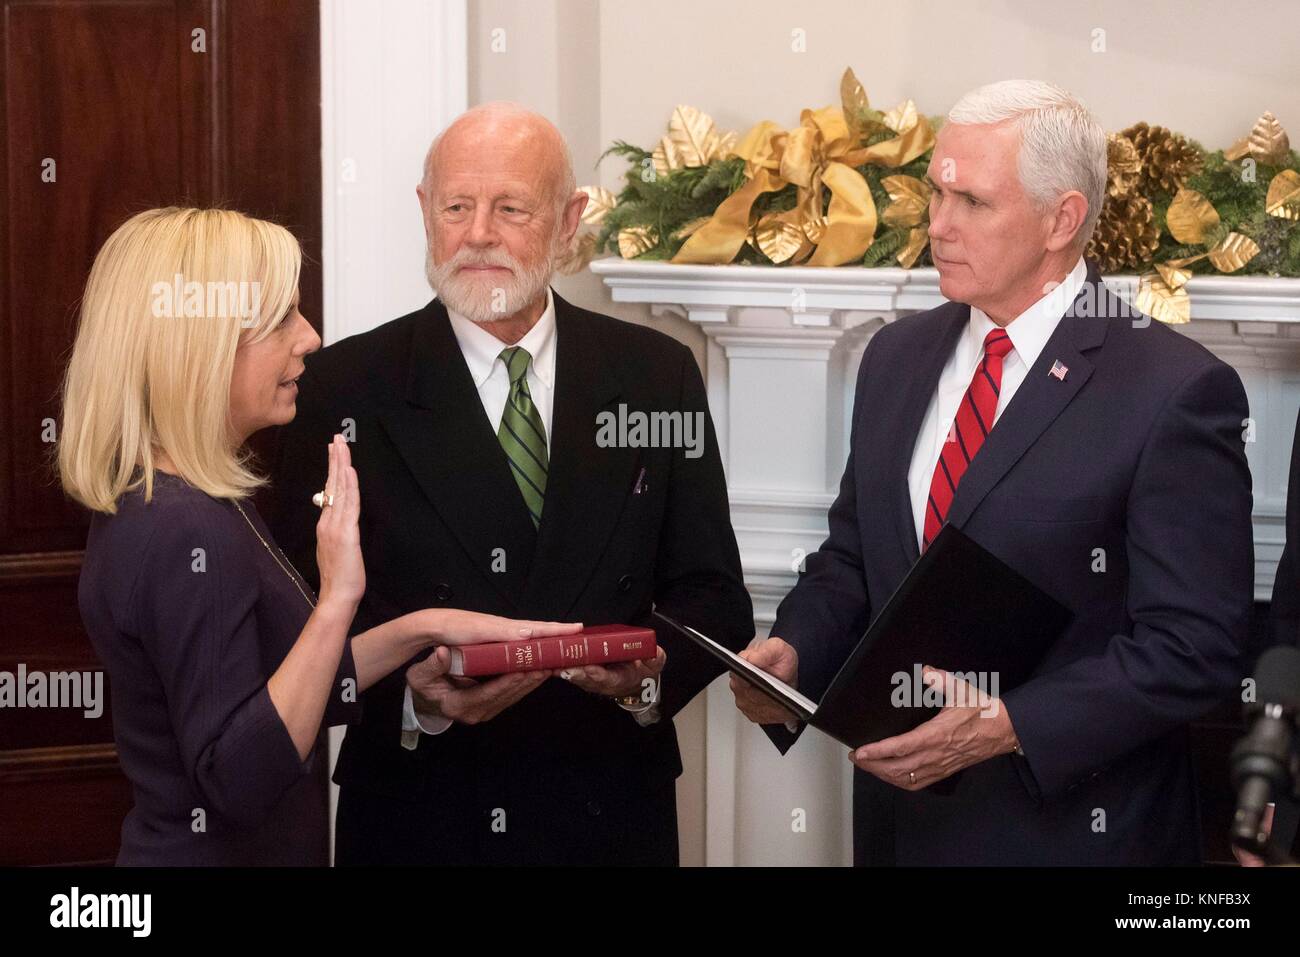 U.S. Vice President Mike Pence, right, administers the oath of office to the new Homeland Security Secretary Kirstjen Nielsen, left, during a ceremony in the Roosevelt Room of  the White House December 8, 2017 in Washington, DC. Stock Photo